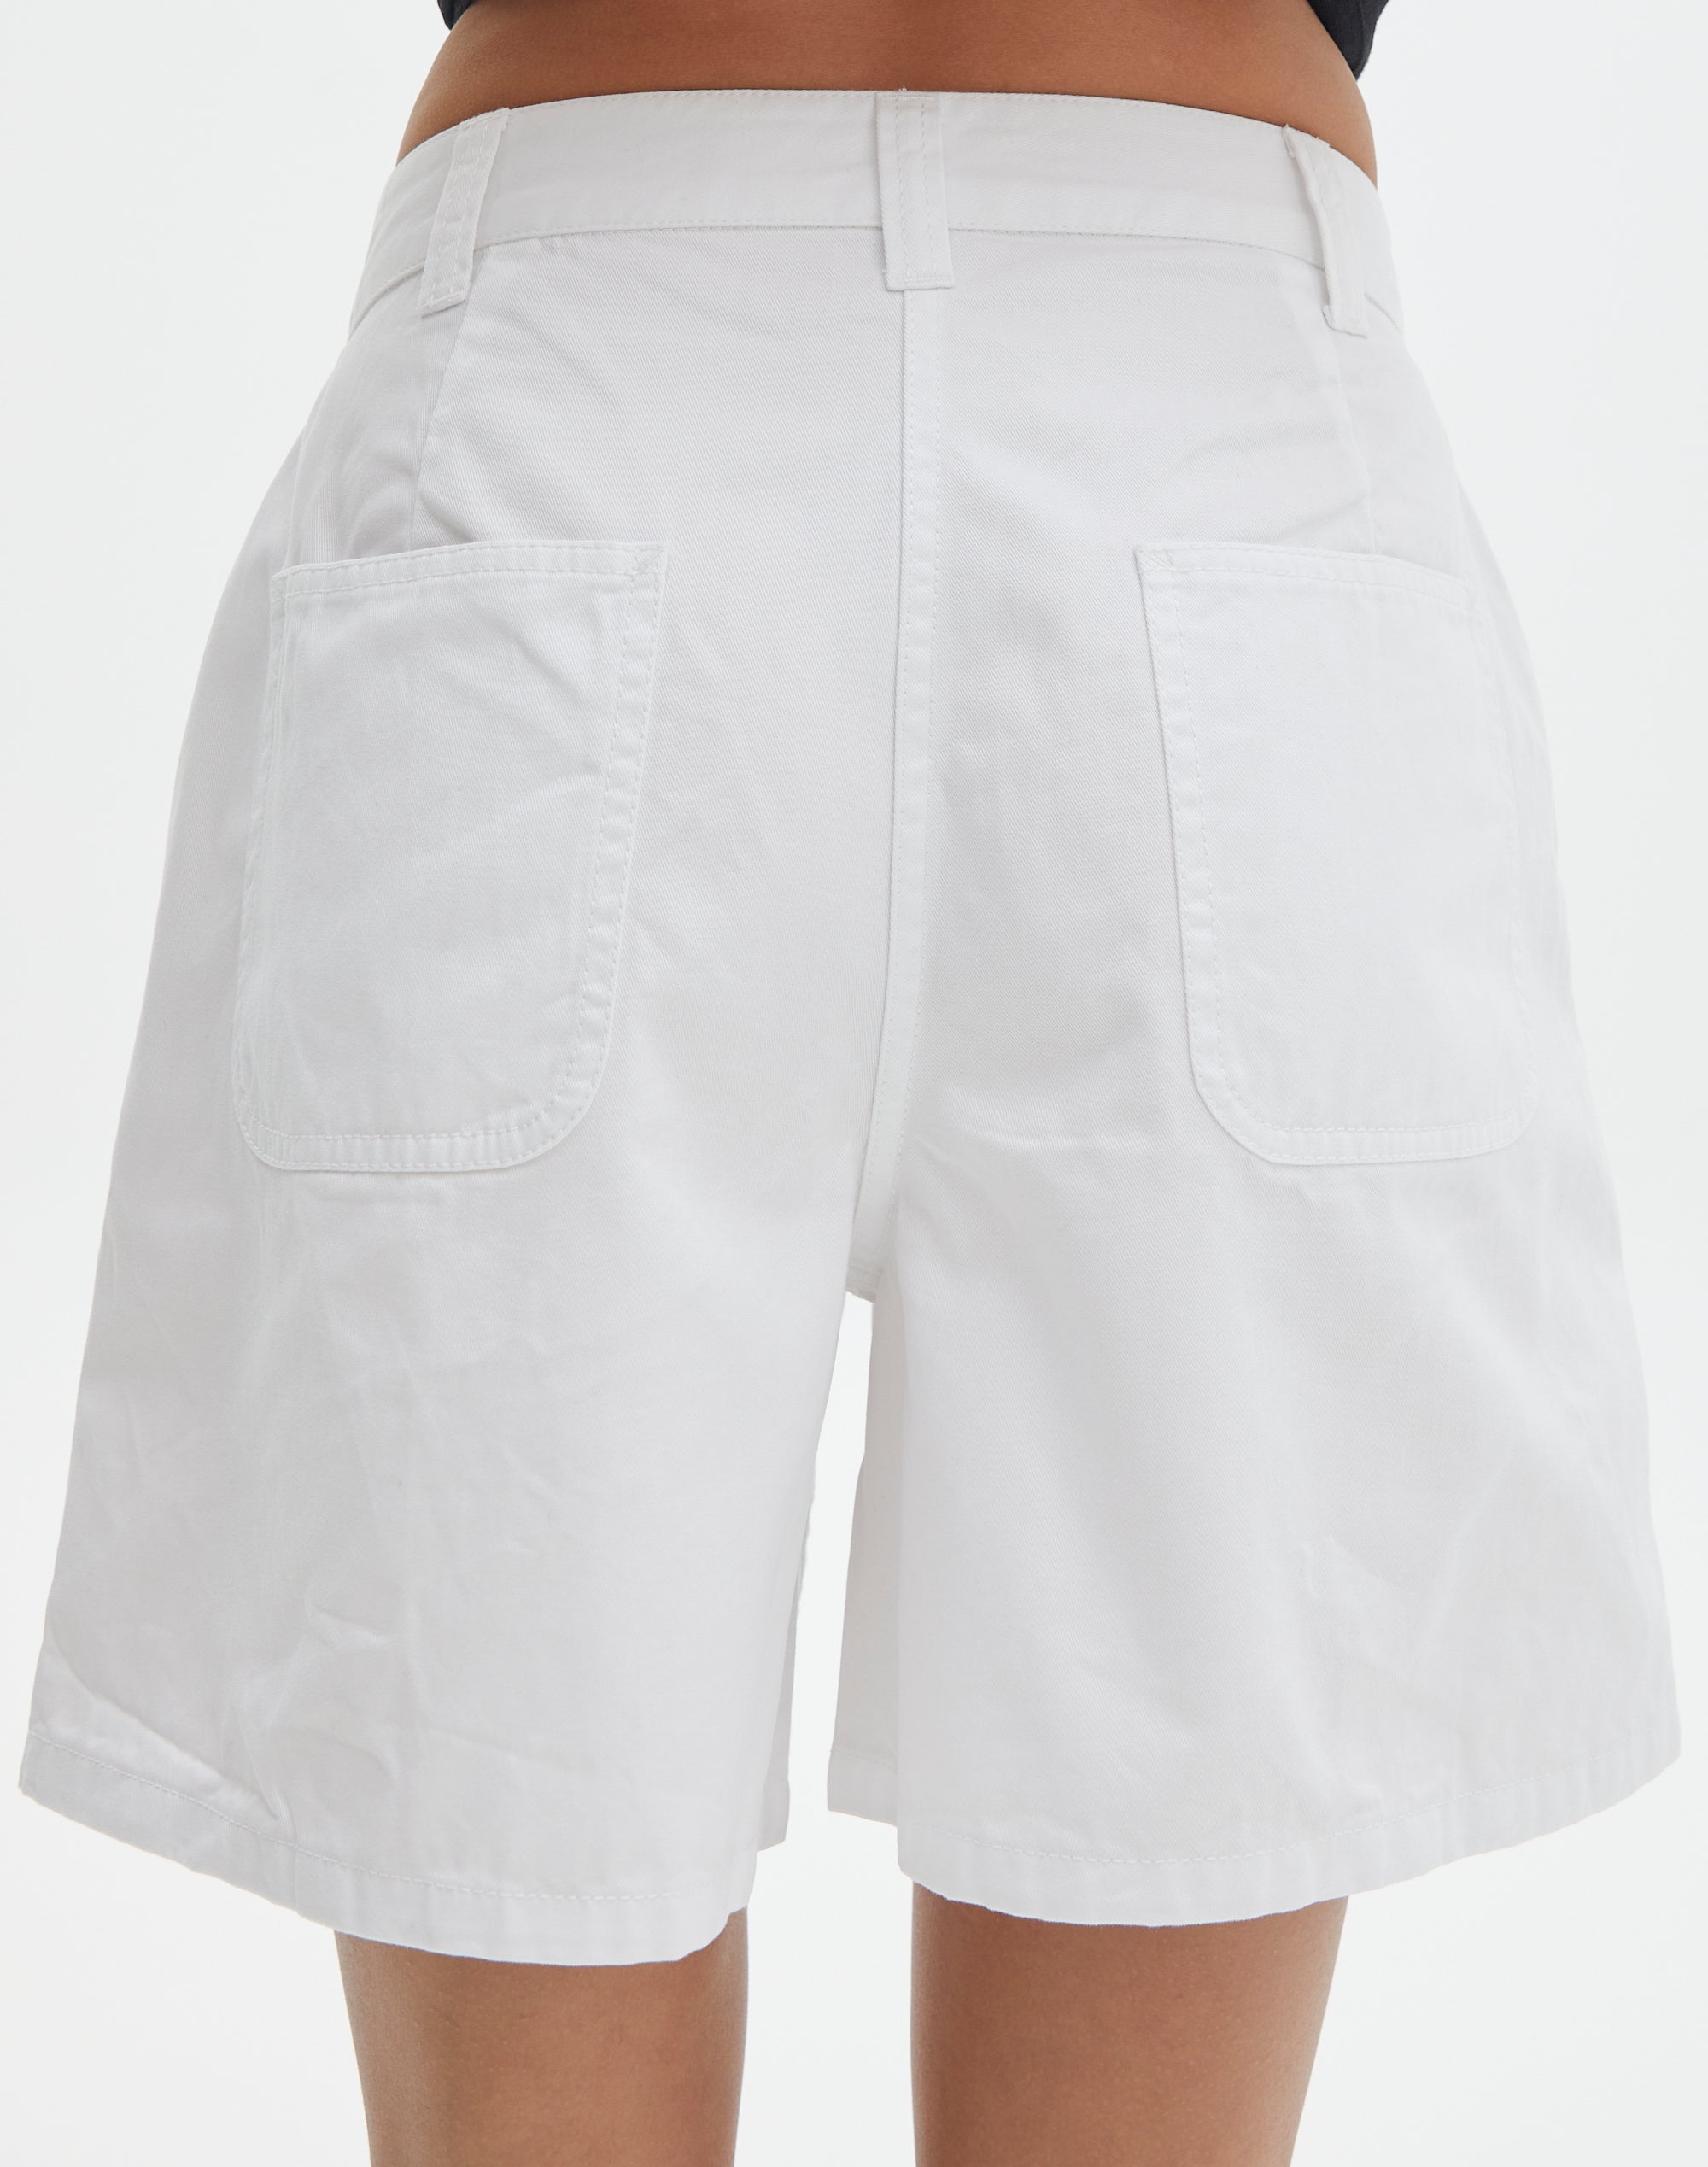 Long Line Cotton Short in White